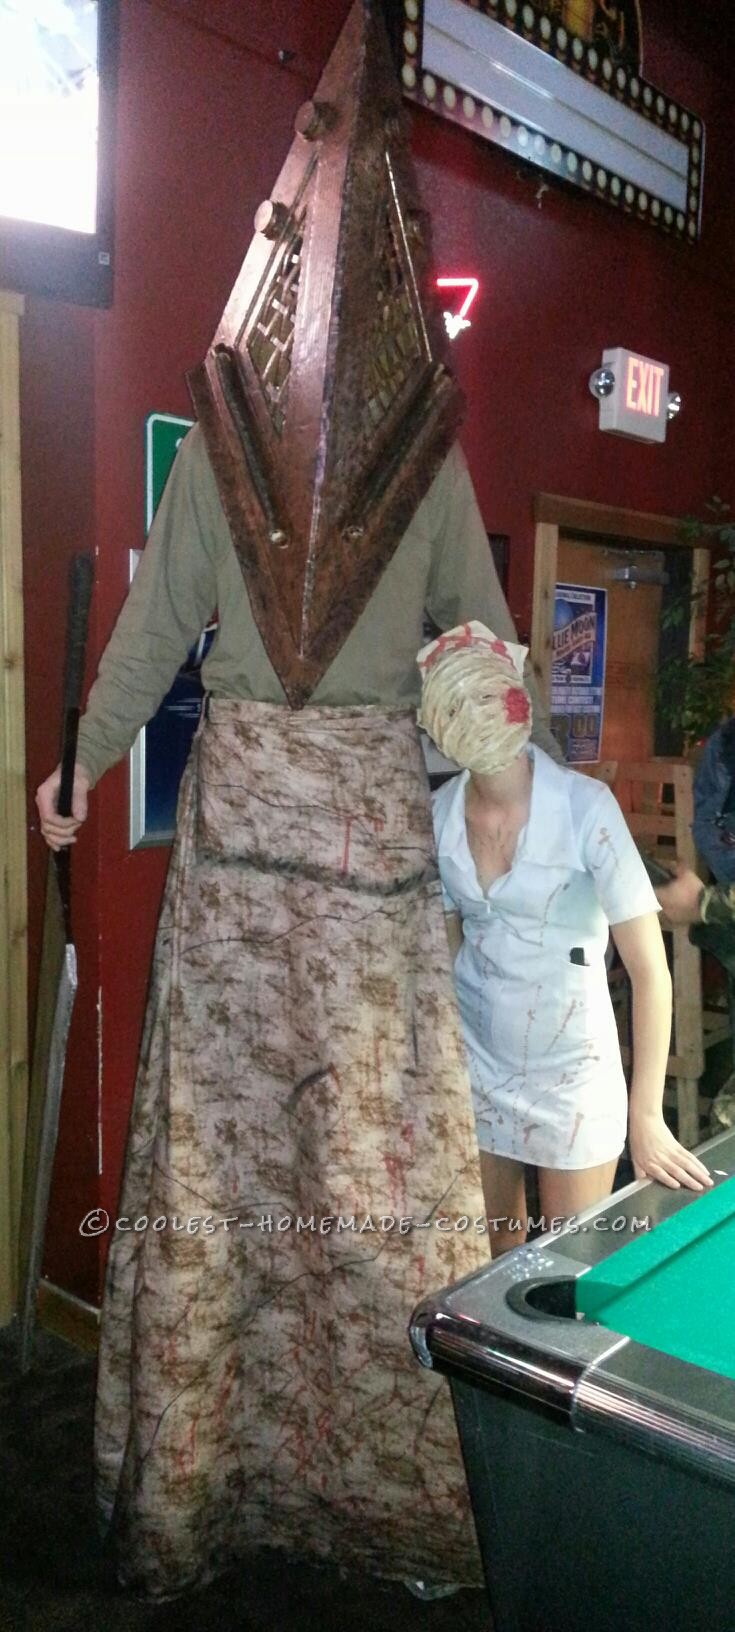 We are the Pyramid Head and bobblehead nurse from the movie silent hill. with the 3D movie just coming out it was perfect for us to dress up as them!